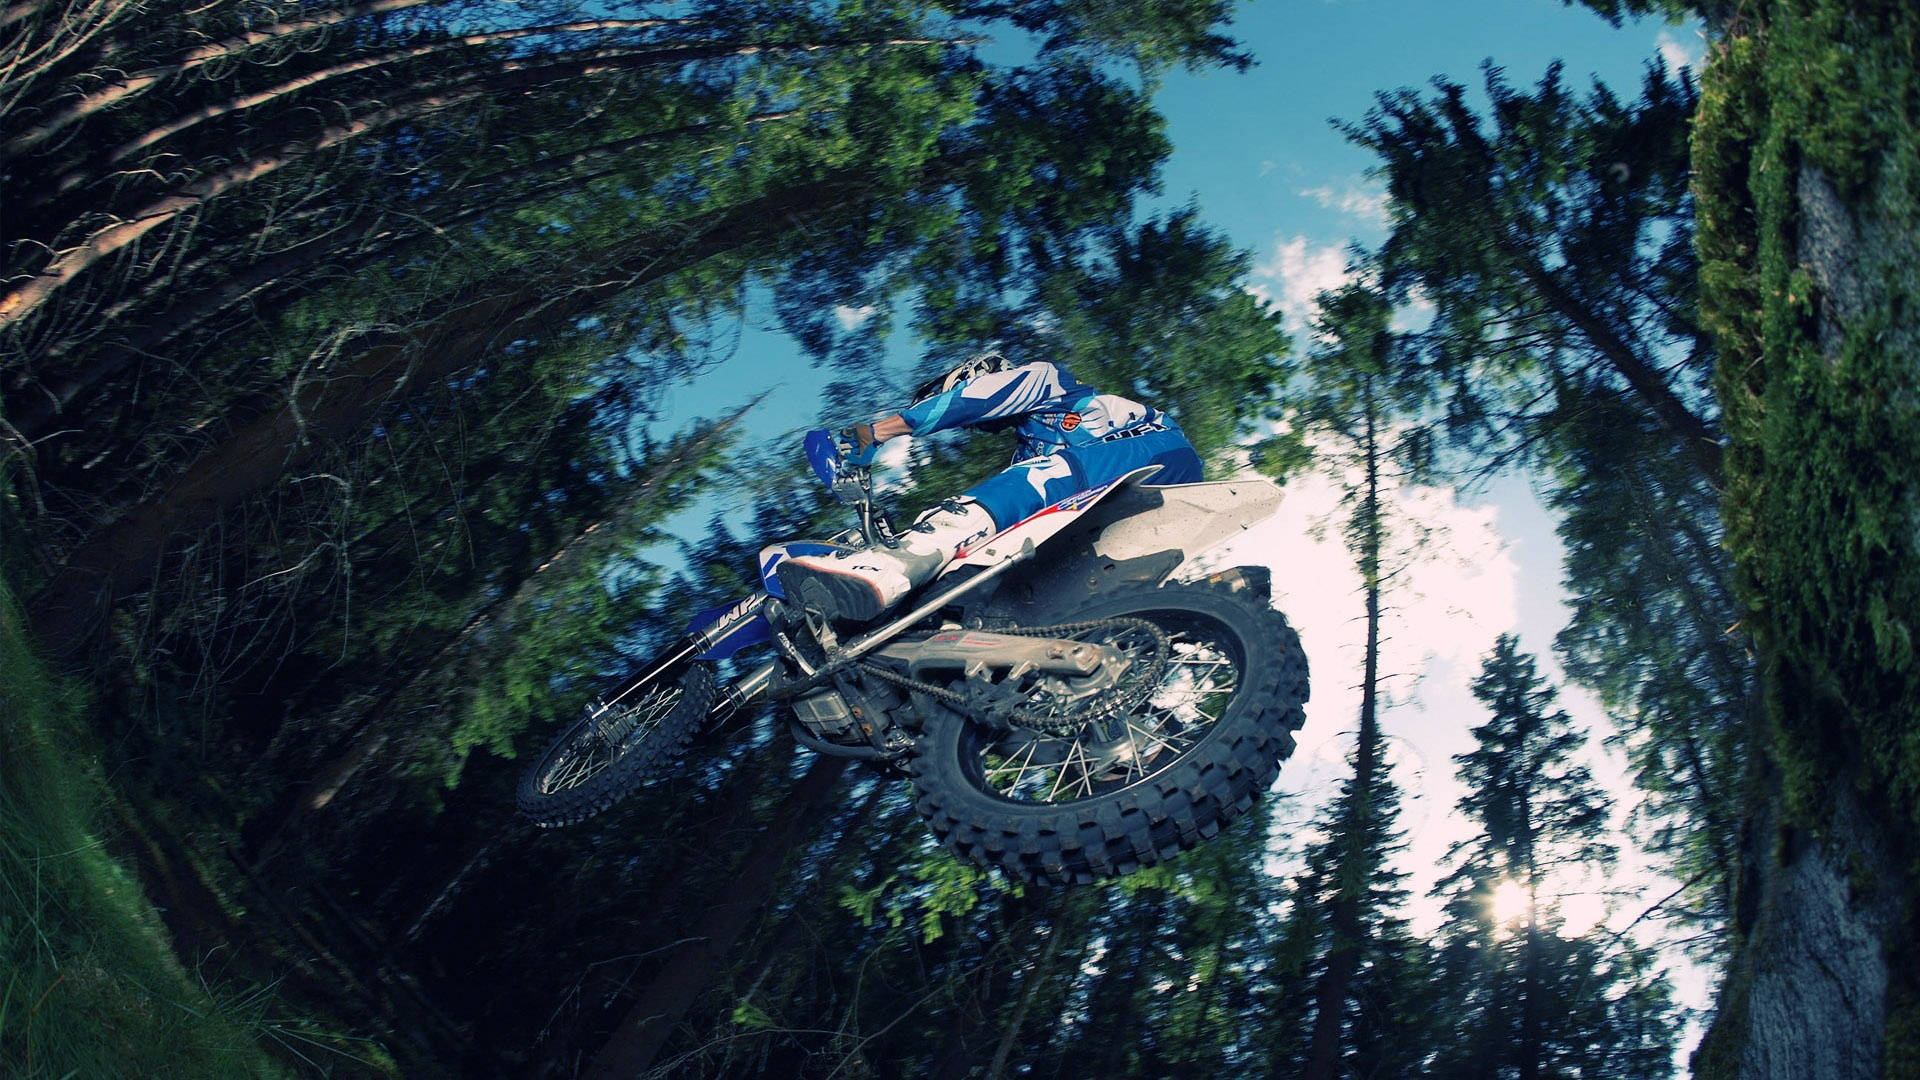 Thrilling Low Angle Shot Of A High-speed Dirt Bike Background